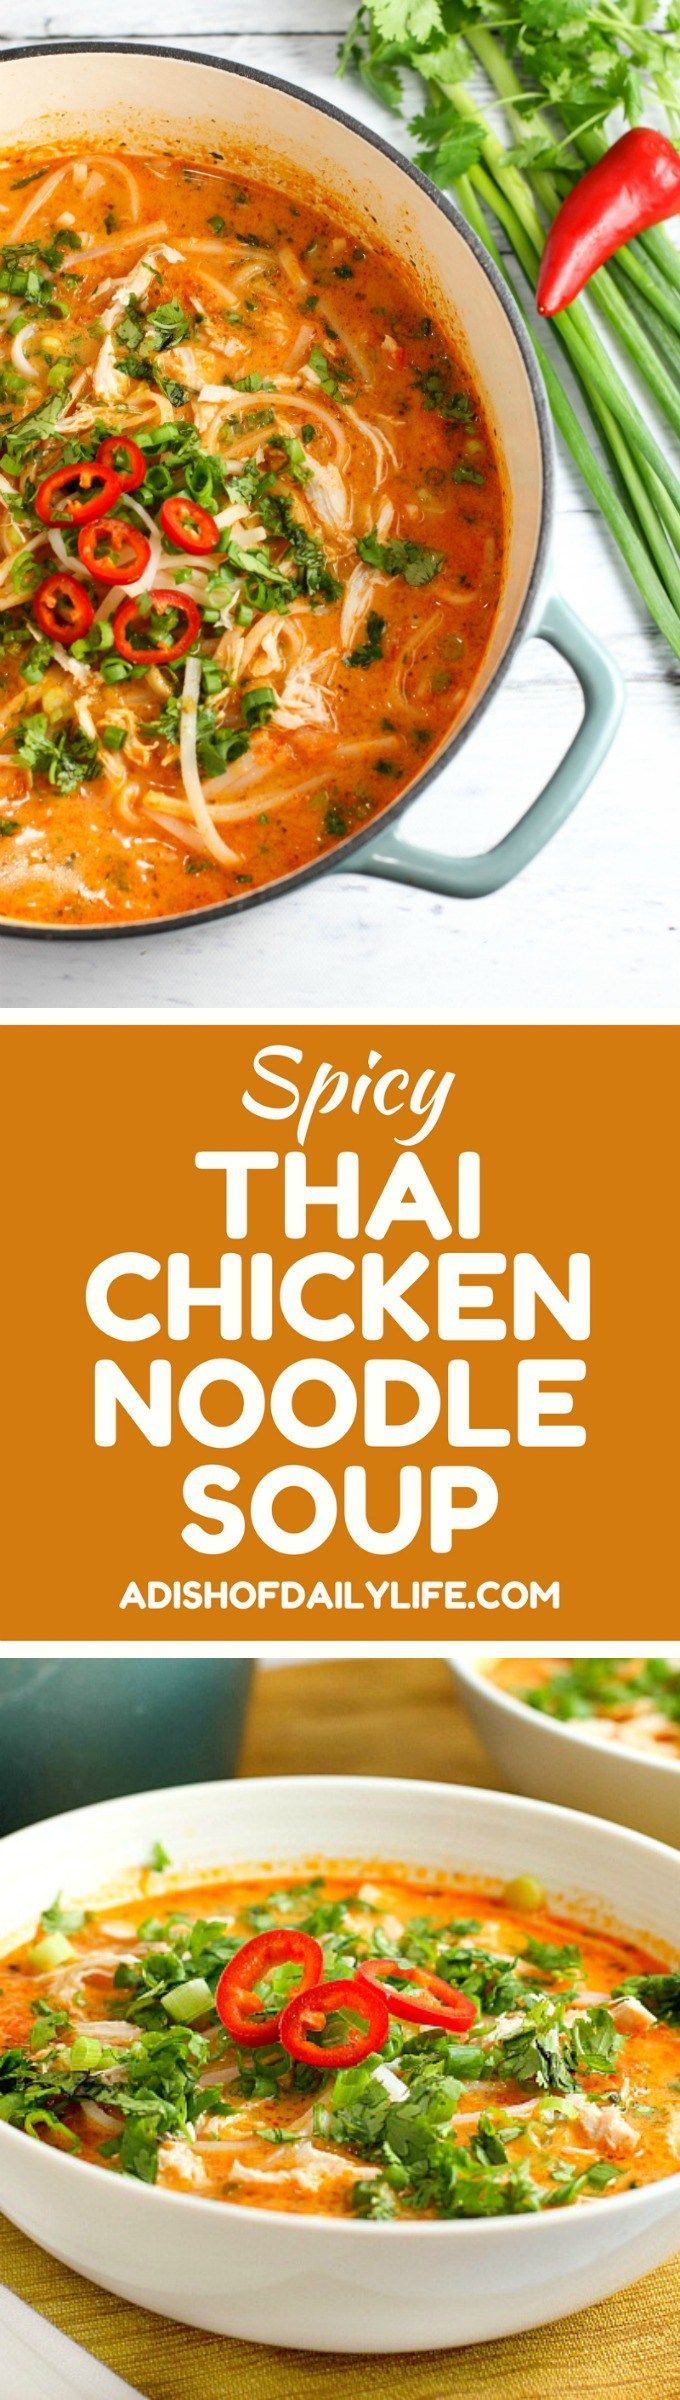 Skip the takeout! This delicious Thai Chicken Noodle Soup is easy to make at home with ingredients you can find in your local